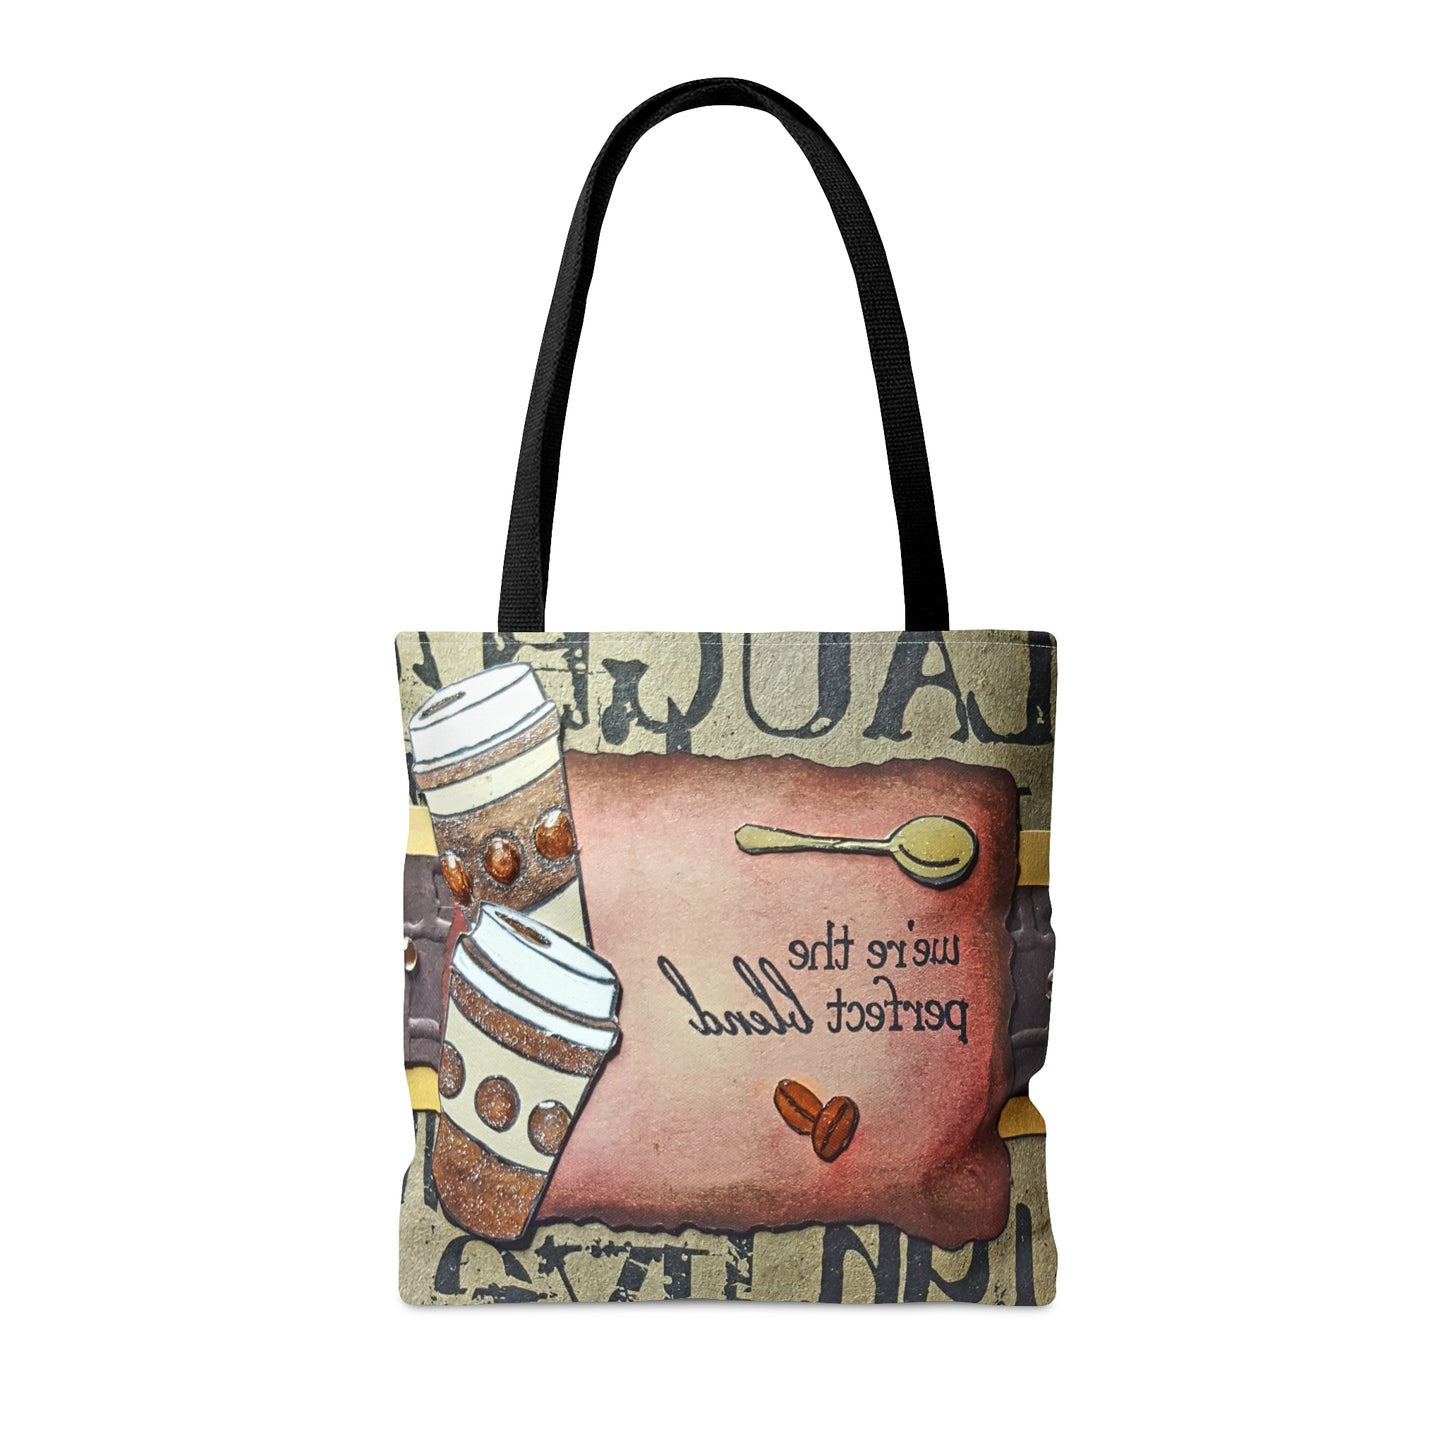 The Perfect Blend Tote Bag